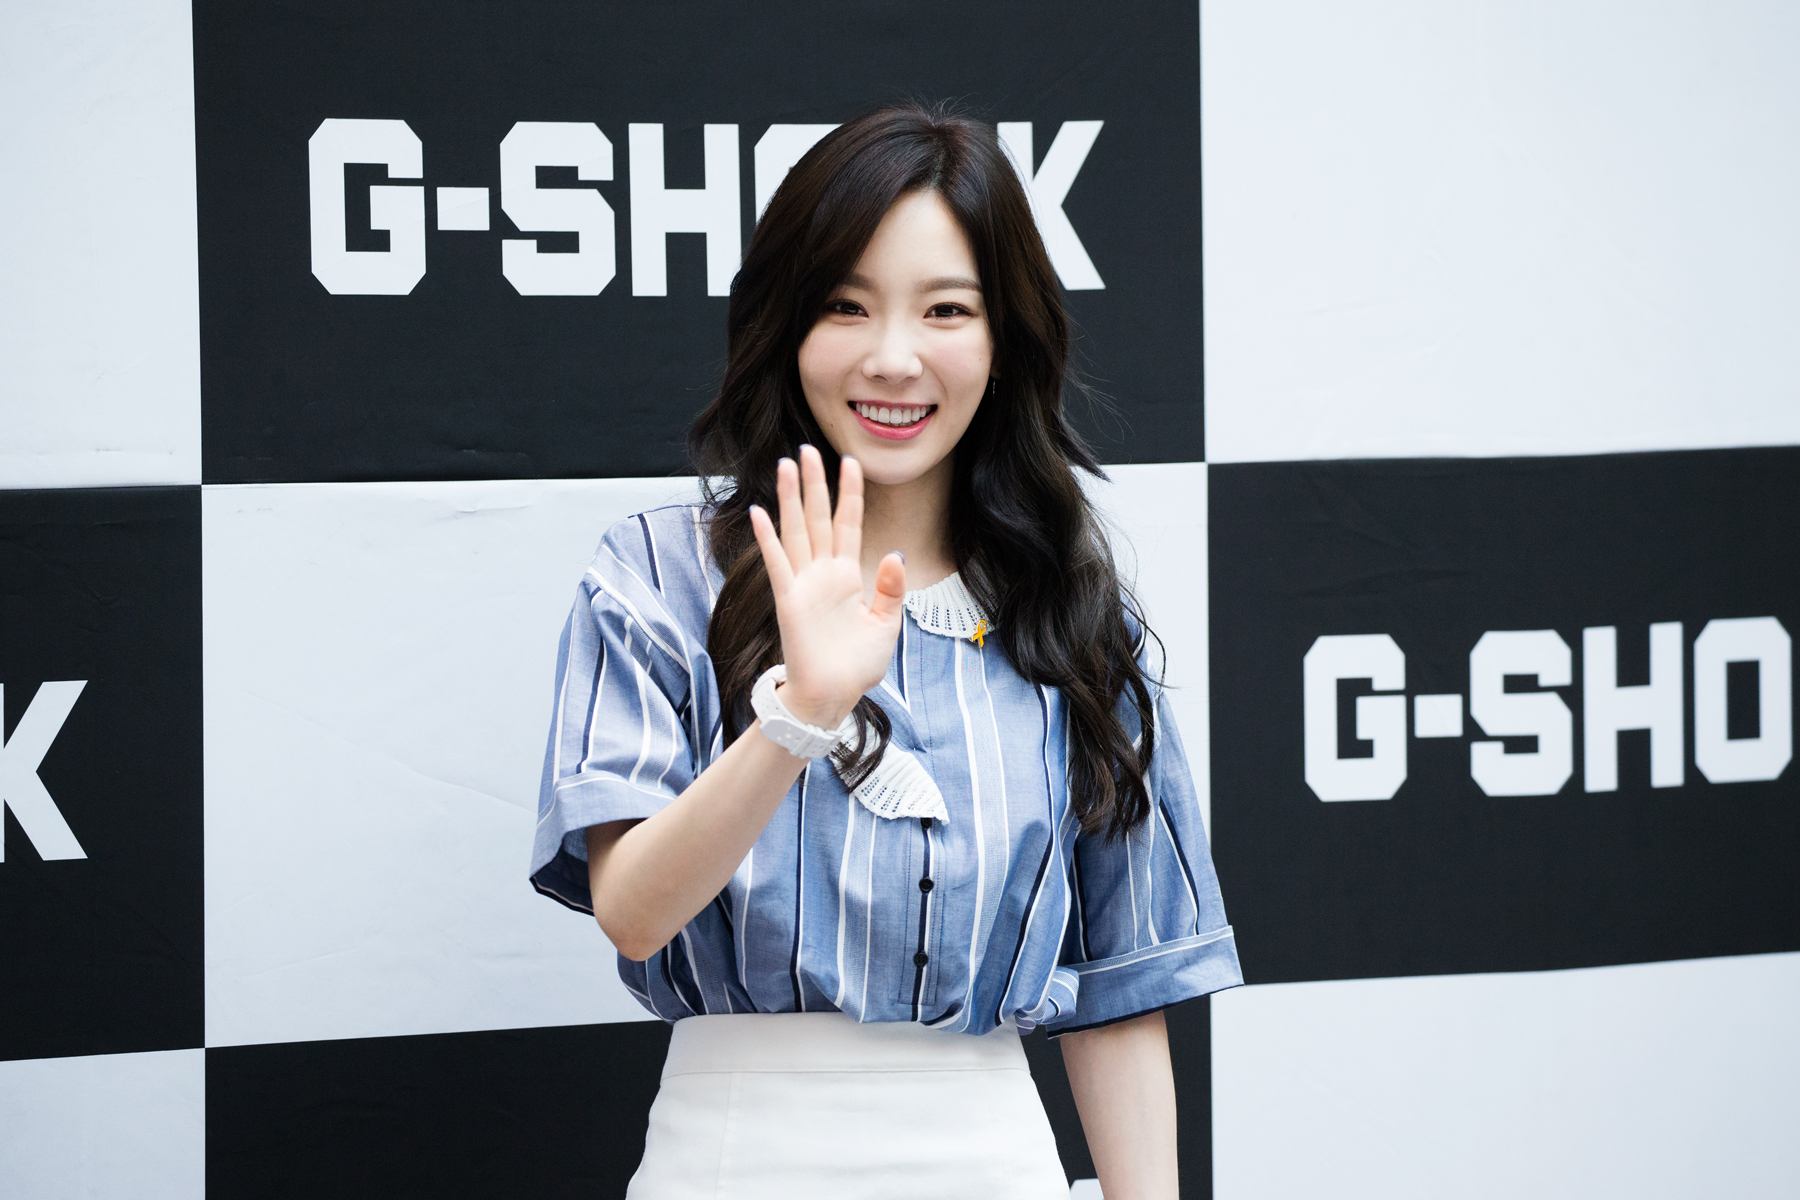 170416 G-SHOCK 팬사인회 태연 by with TaeYeon (2).jpg